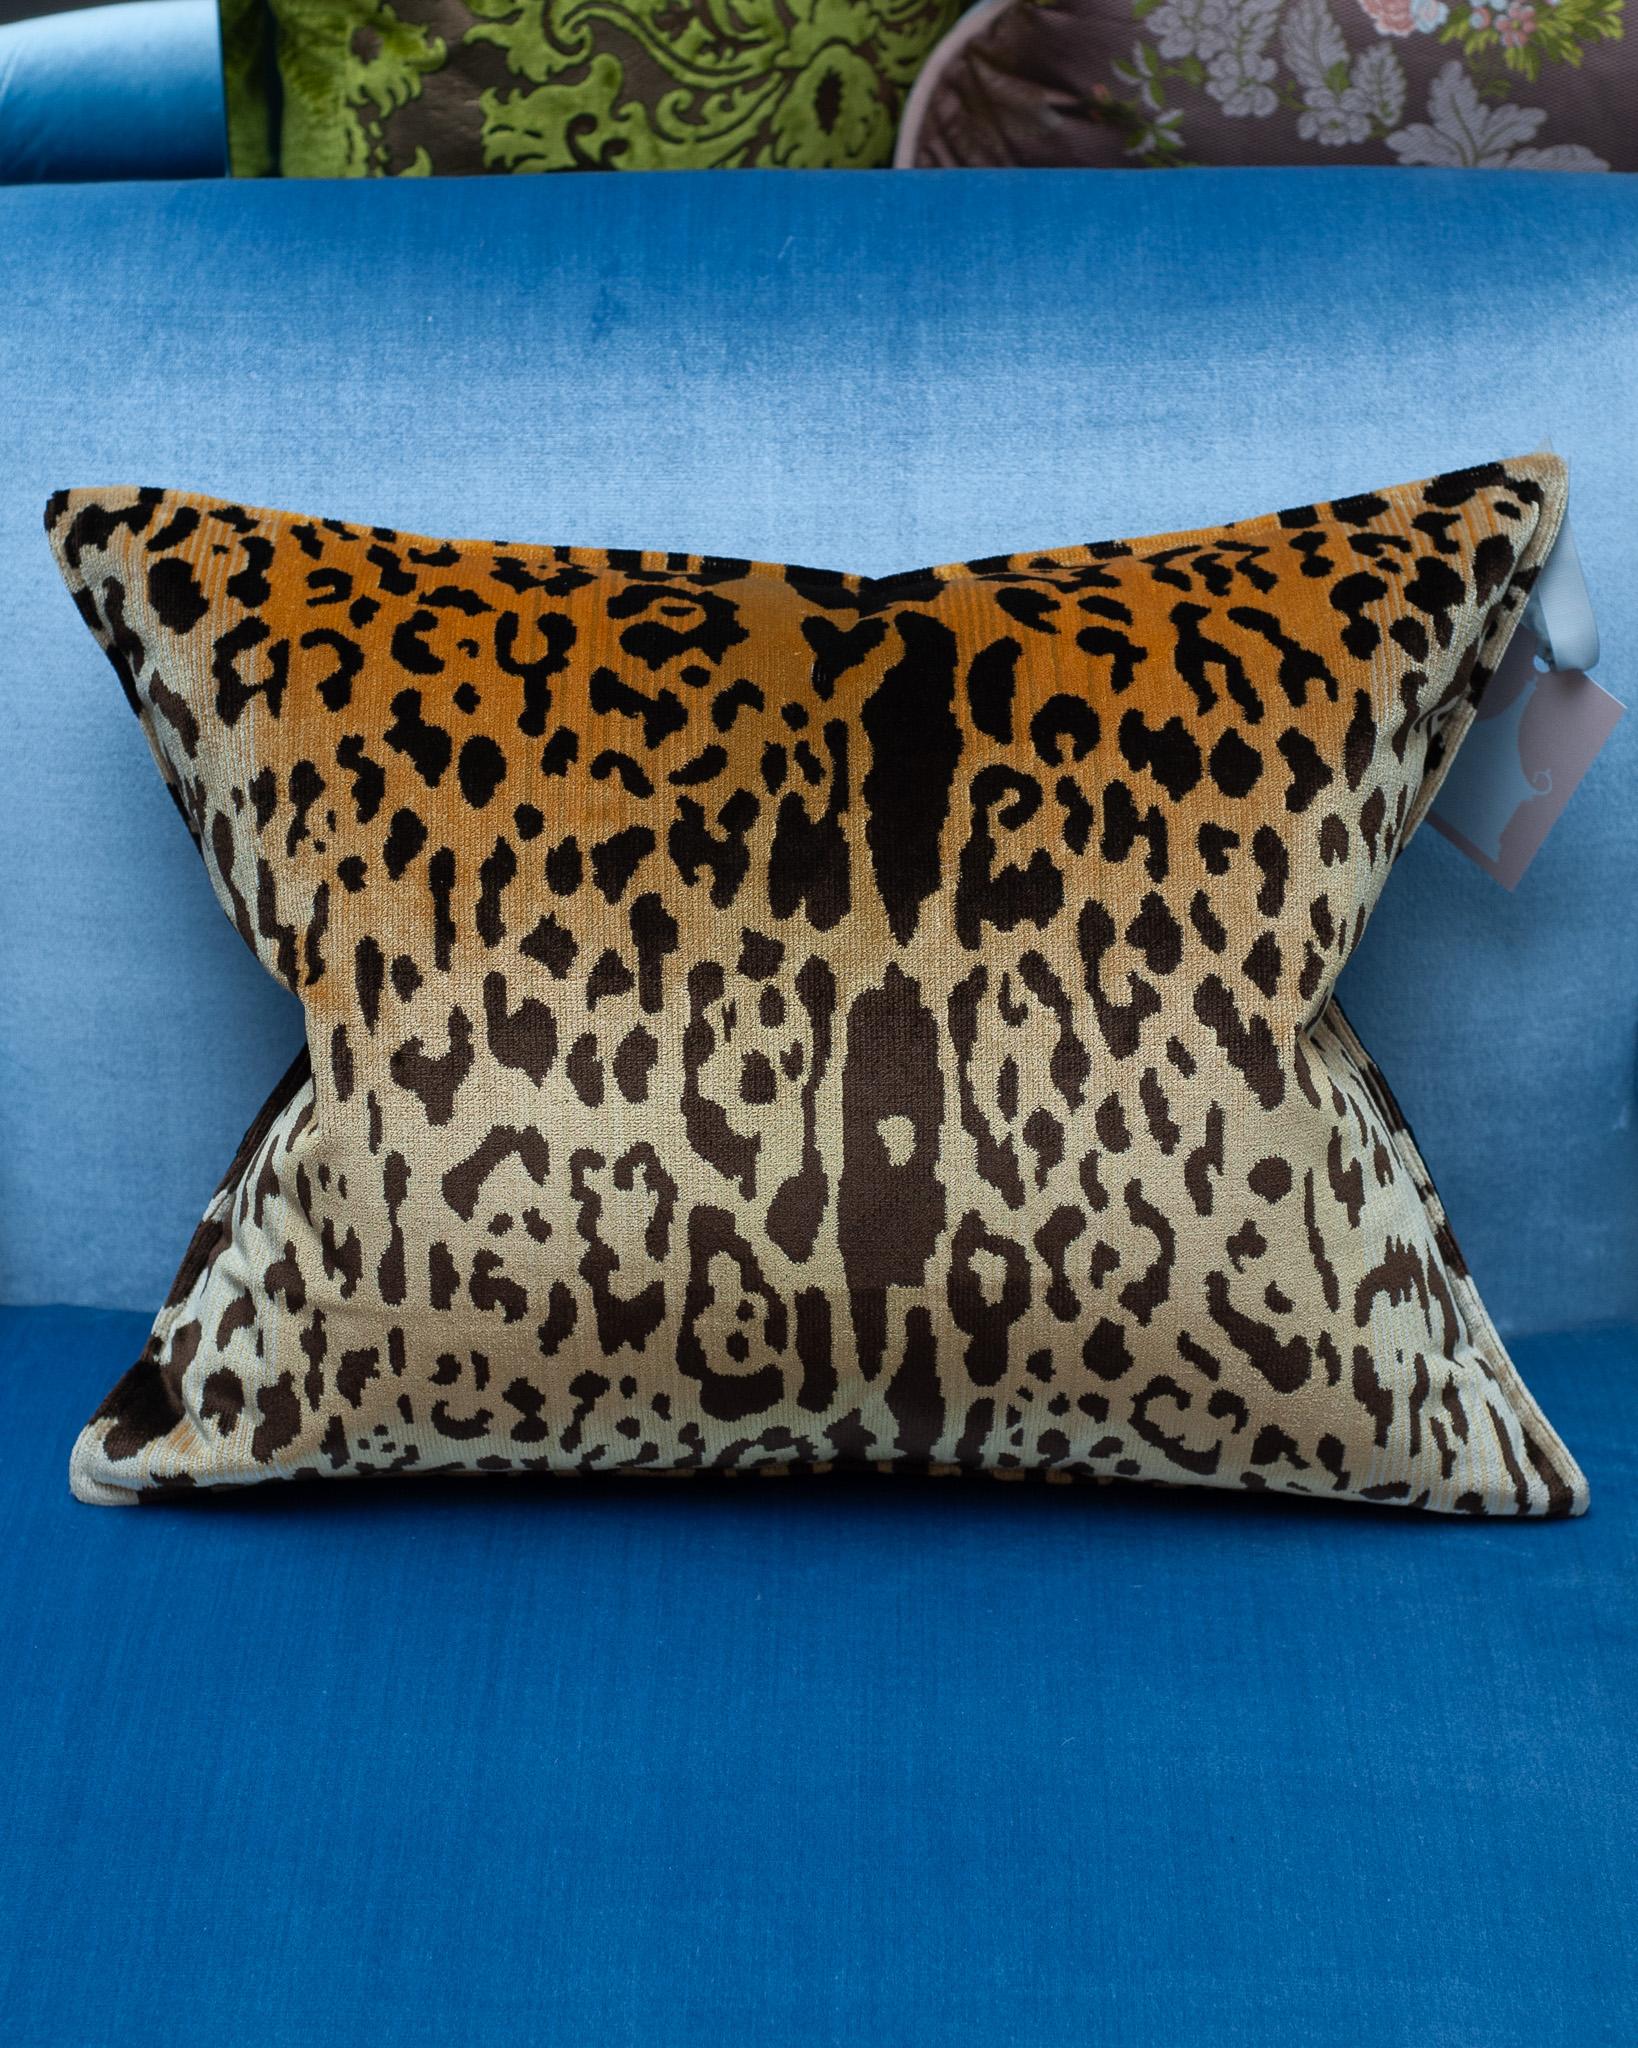 A stunning Bevilacqua Tessuti silk velvet pillow in tan and black with leopard pattern. Made in Bevilacqua's workshop for Maison Nurita, this luxurious pillow is backed in Bevilacqua black silk moiré. Filled with the highest quality down and feather